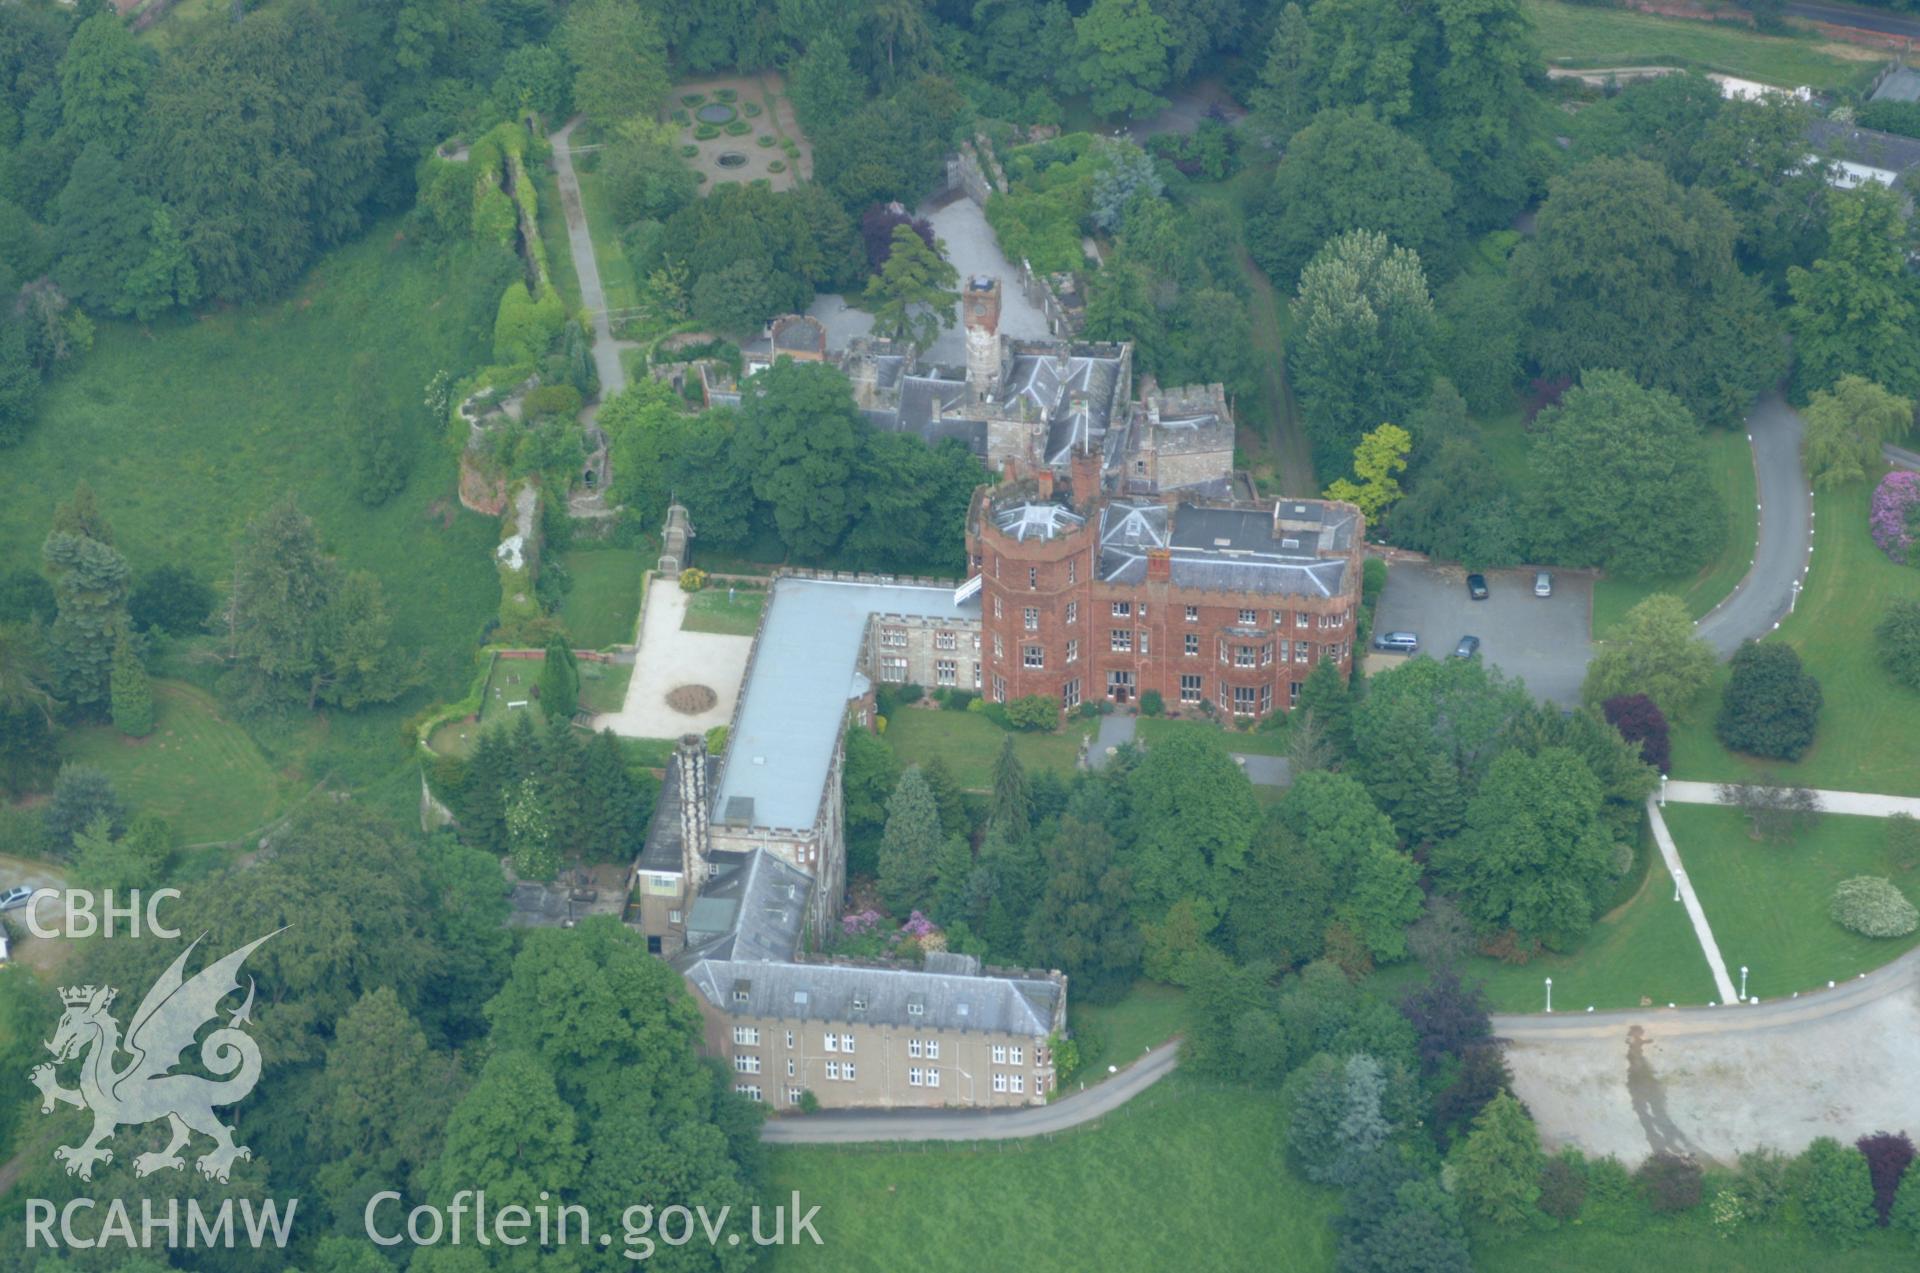 RCAHMW colour oblique aerial photograph of Ruthin Castle taken on 08/06/2004 by Toby Driver